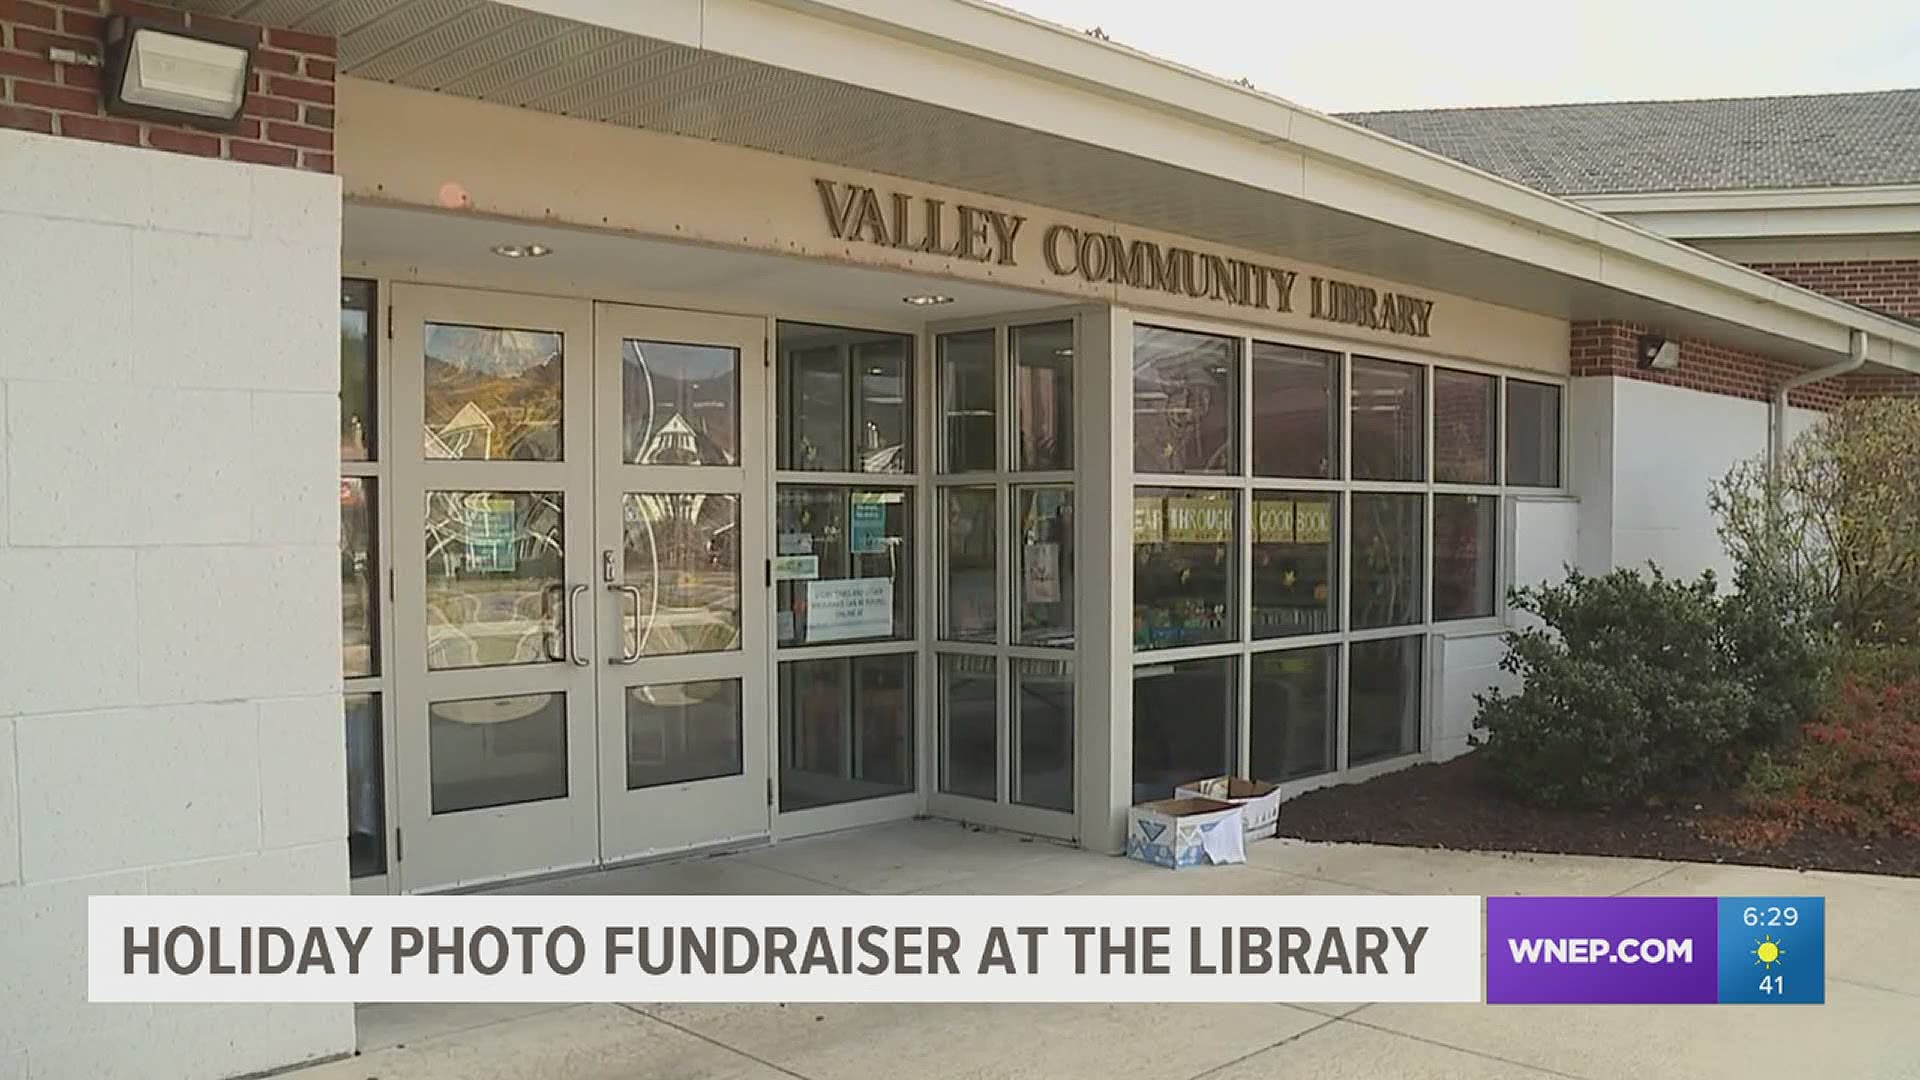 Because of the pandemic, the library had to cancel its major fundraiser in April. Fundraisers like the one Saturday help make up for the loss.